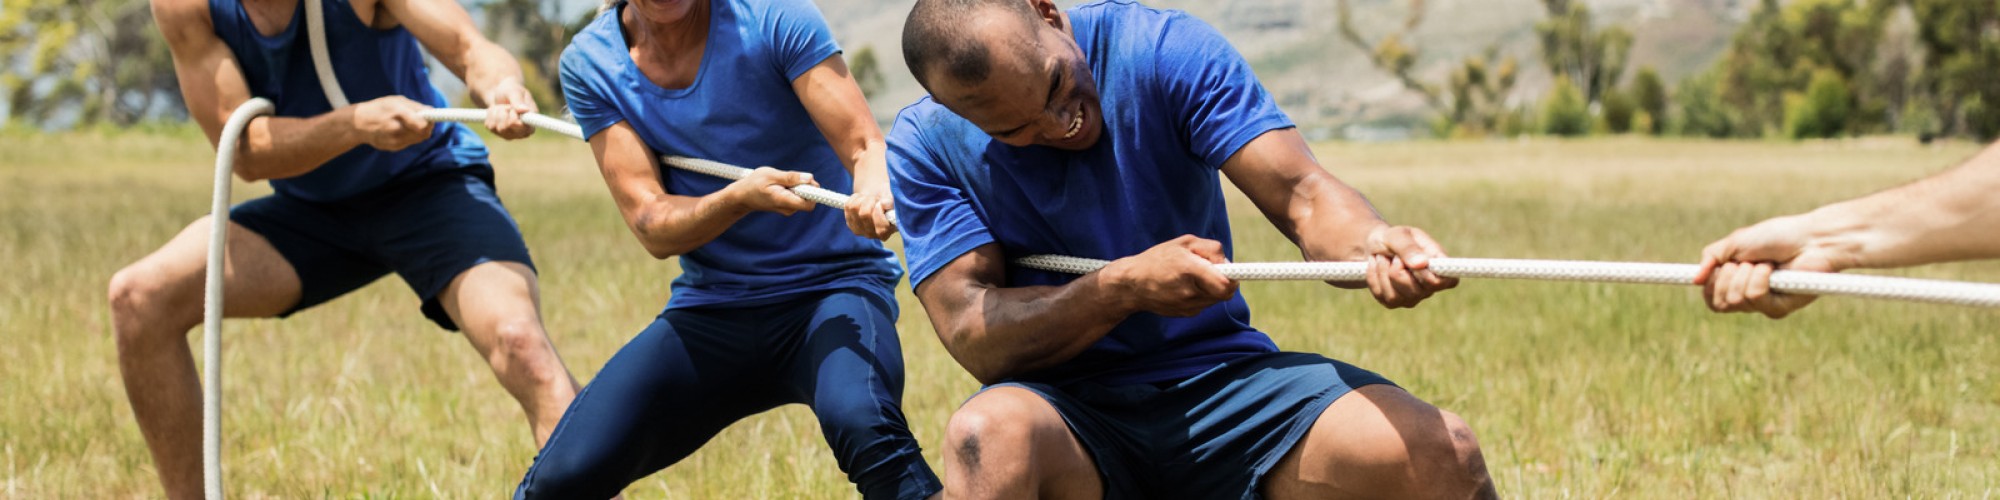 Adventures Corporate People playing tug of war during obstacle training course